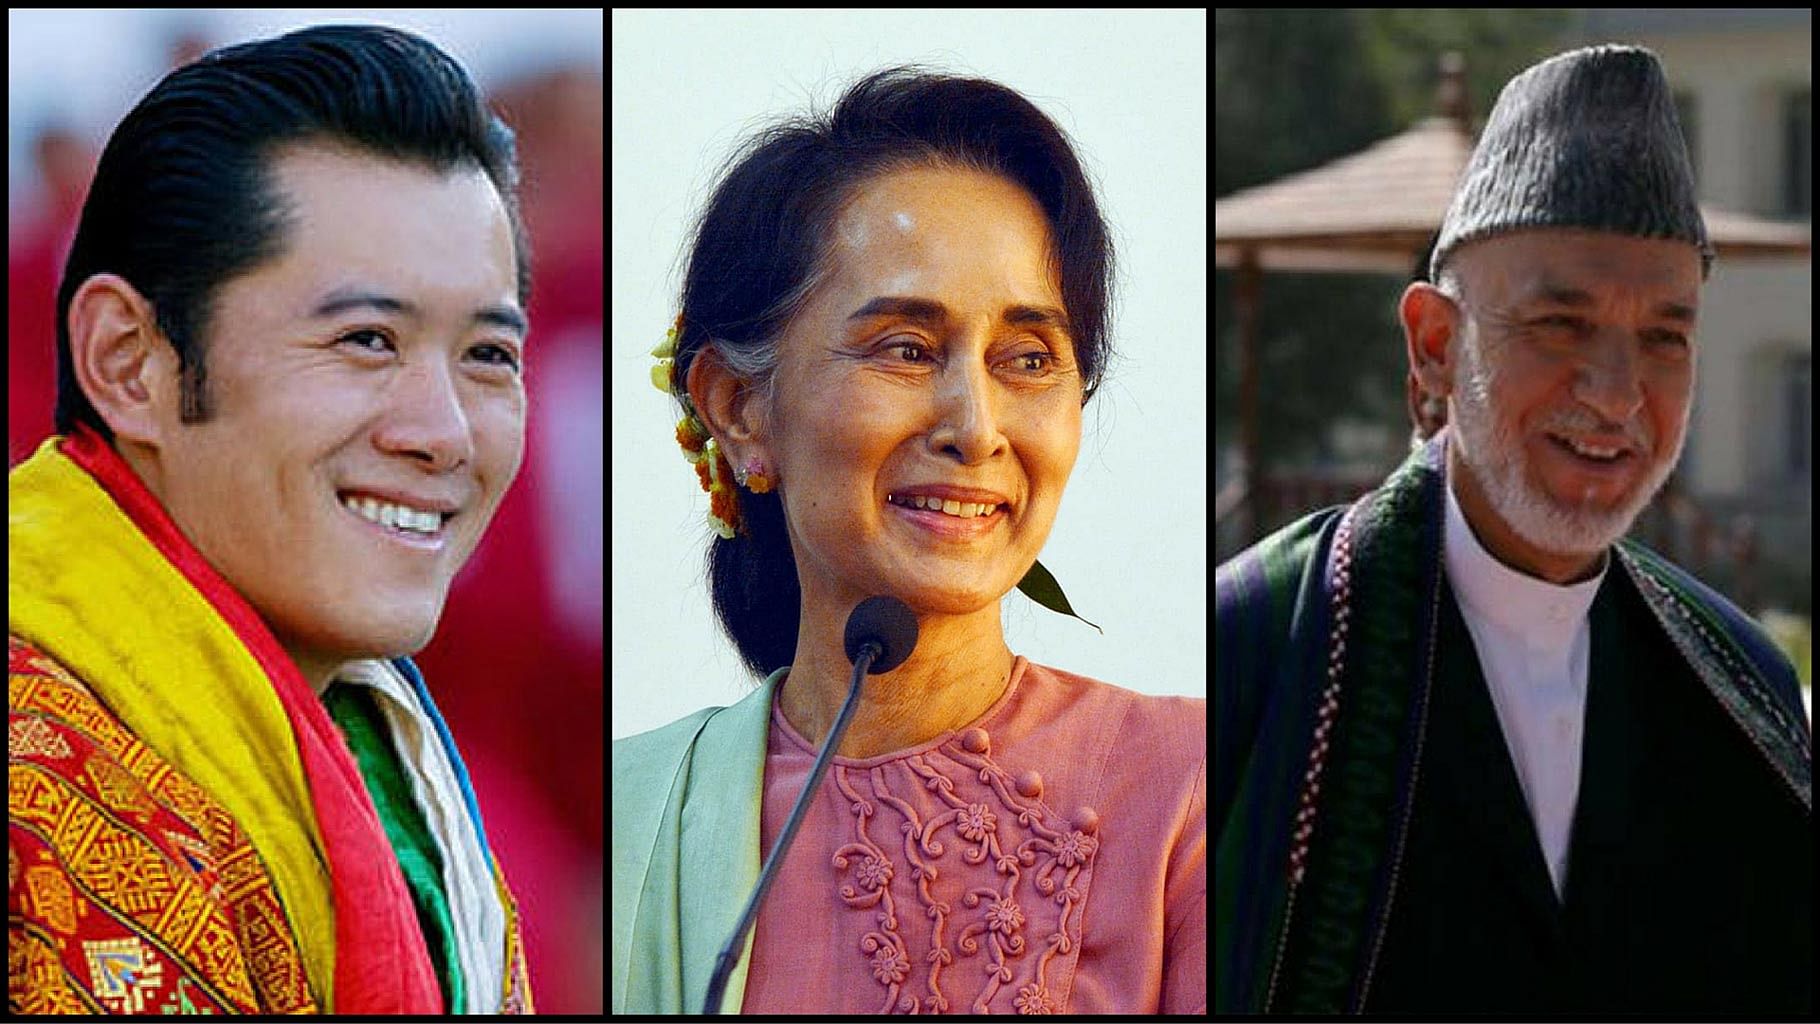 King of Bhutan Jigme Khesar Namgyal Wangchuk (left), incumbent State Counsellor of Myanmar Aung San Suu Kyi, and former President of Afghanistan Hamid Karzai (right). (Photo: <b>The Quint</b>)